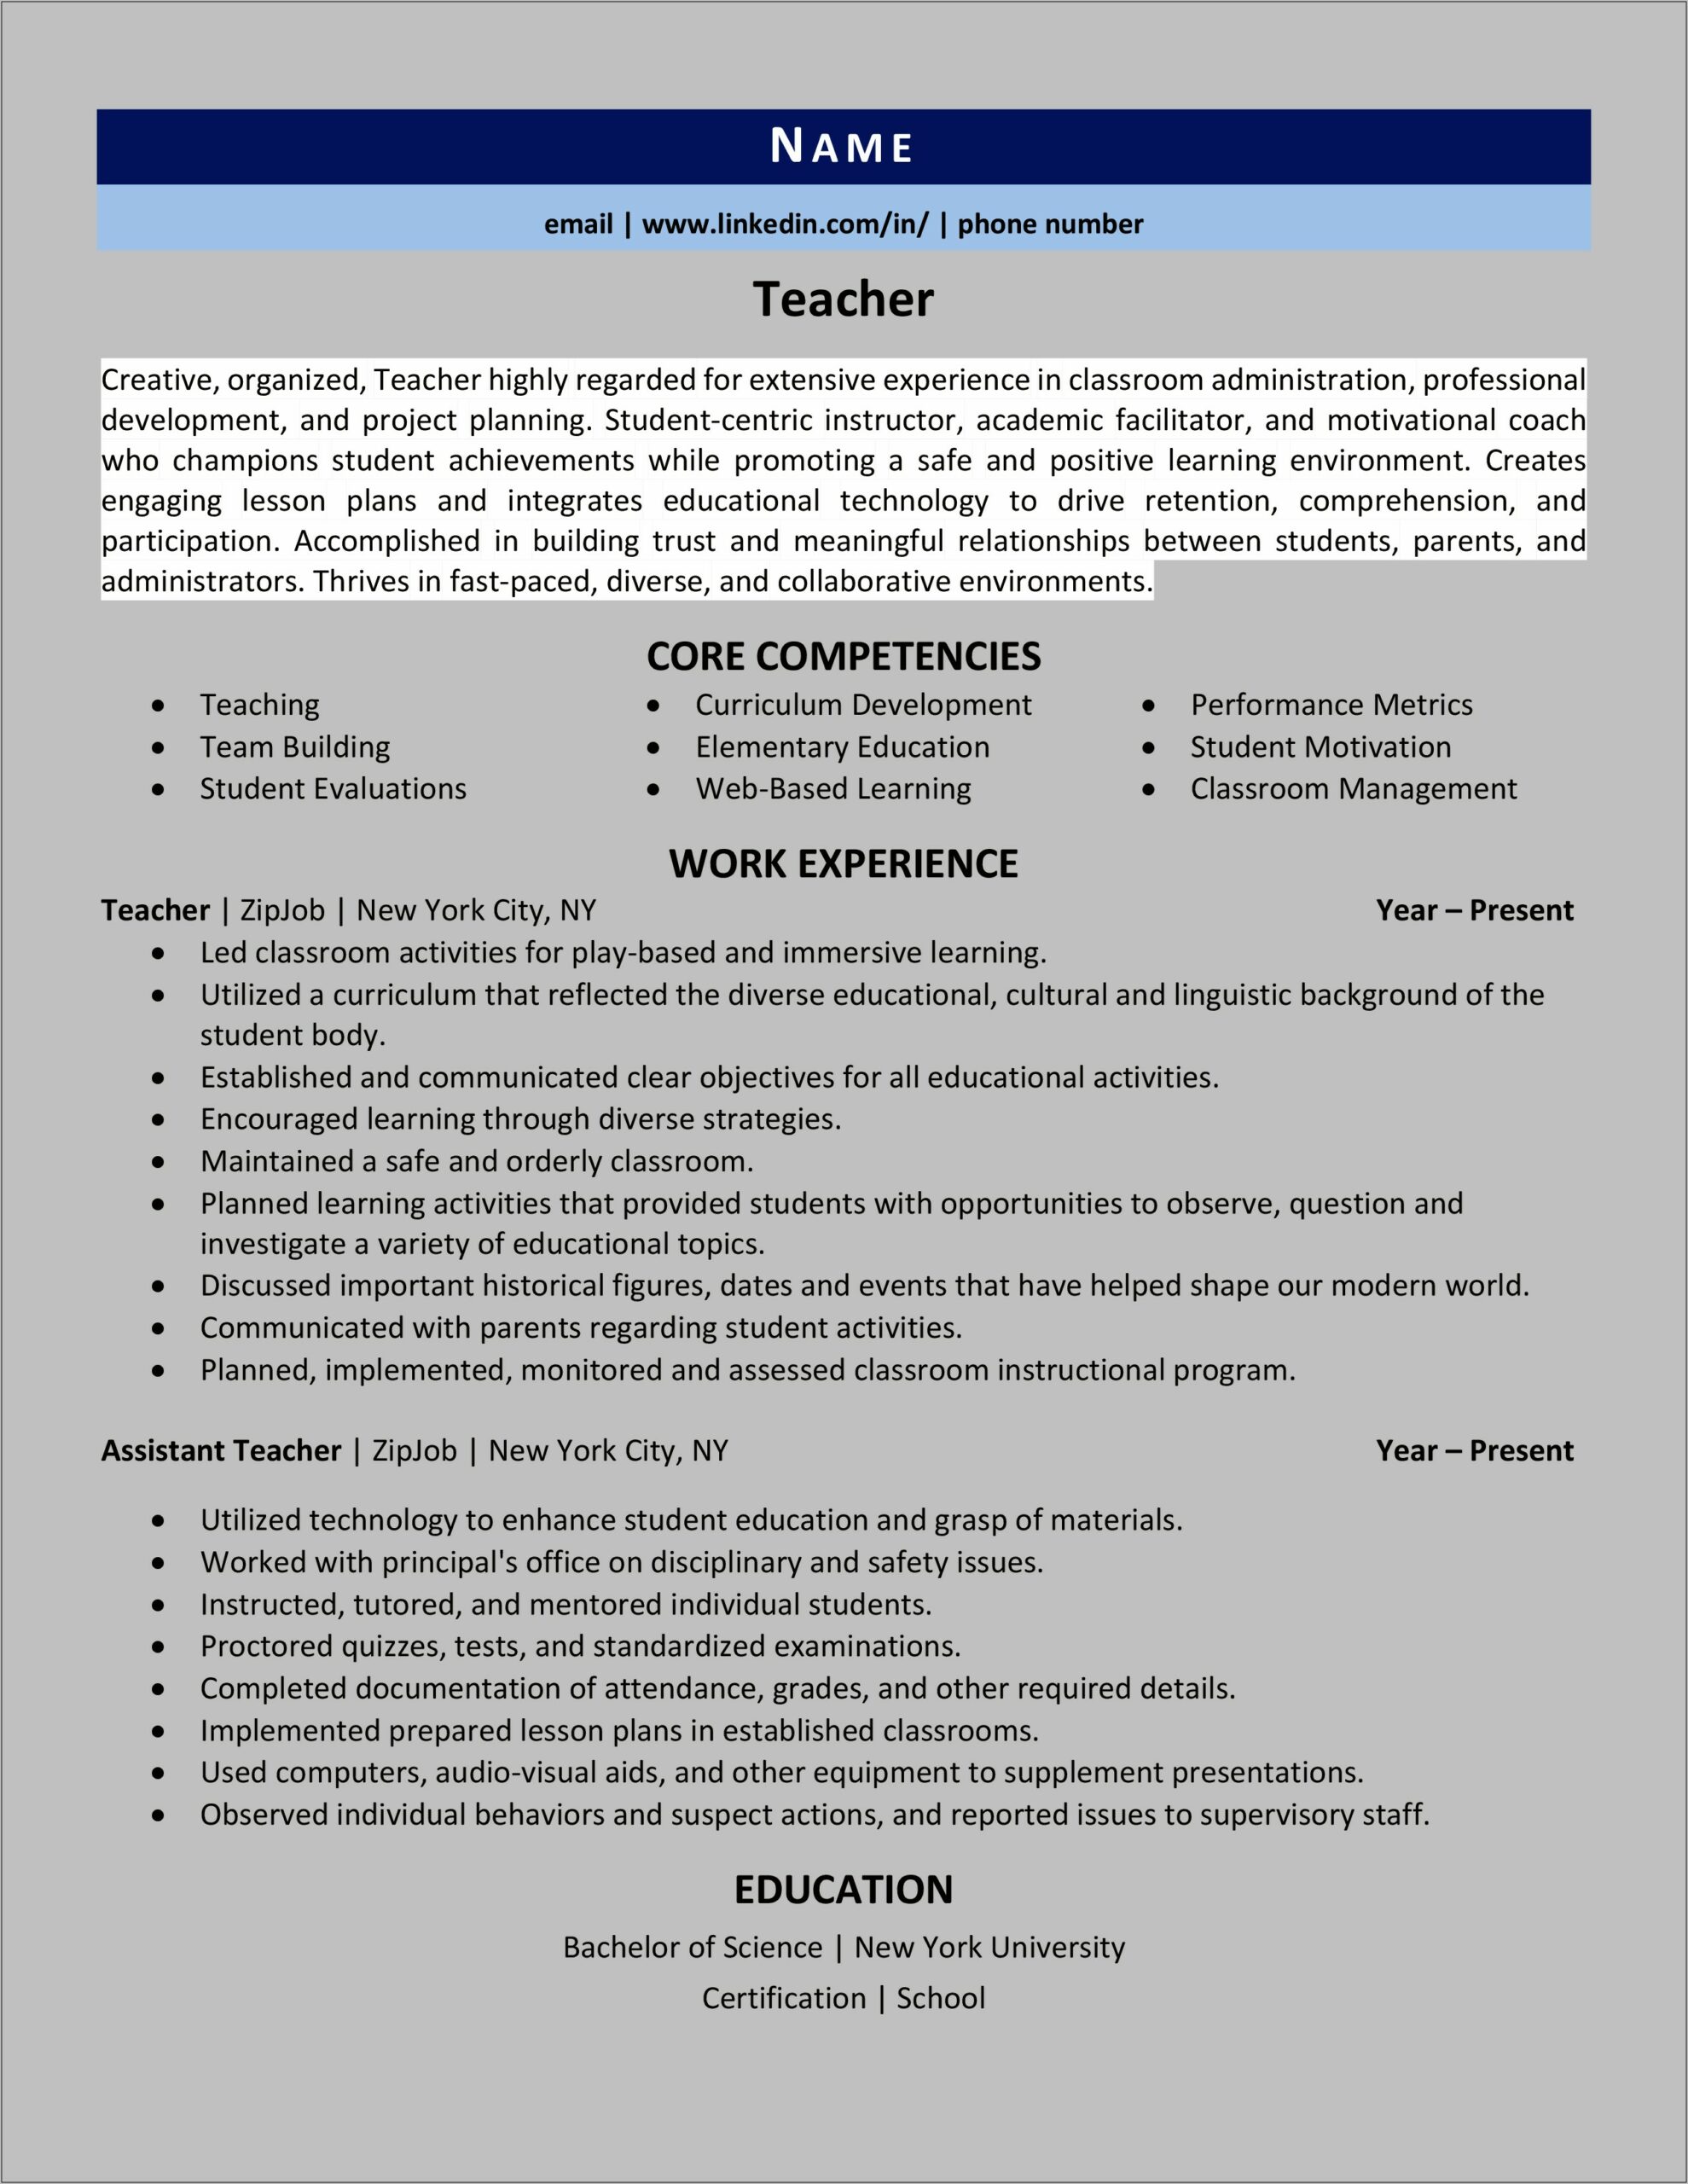 Examples Of Experienced Teacher Resumes